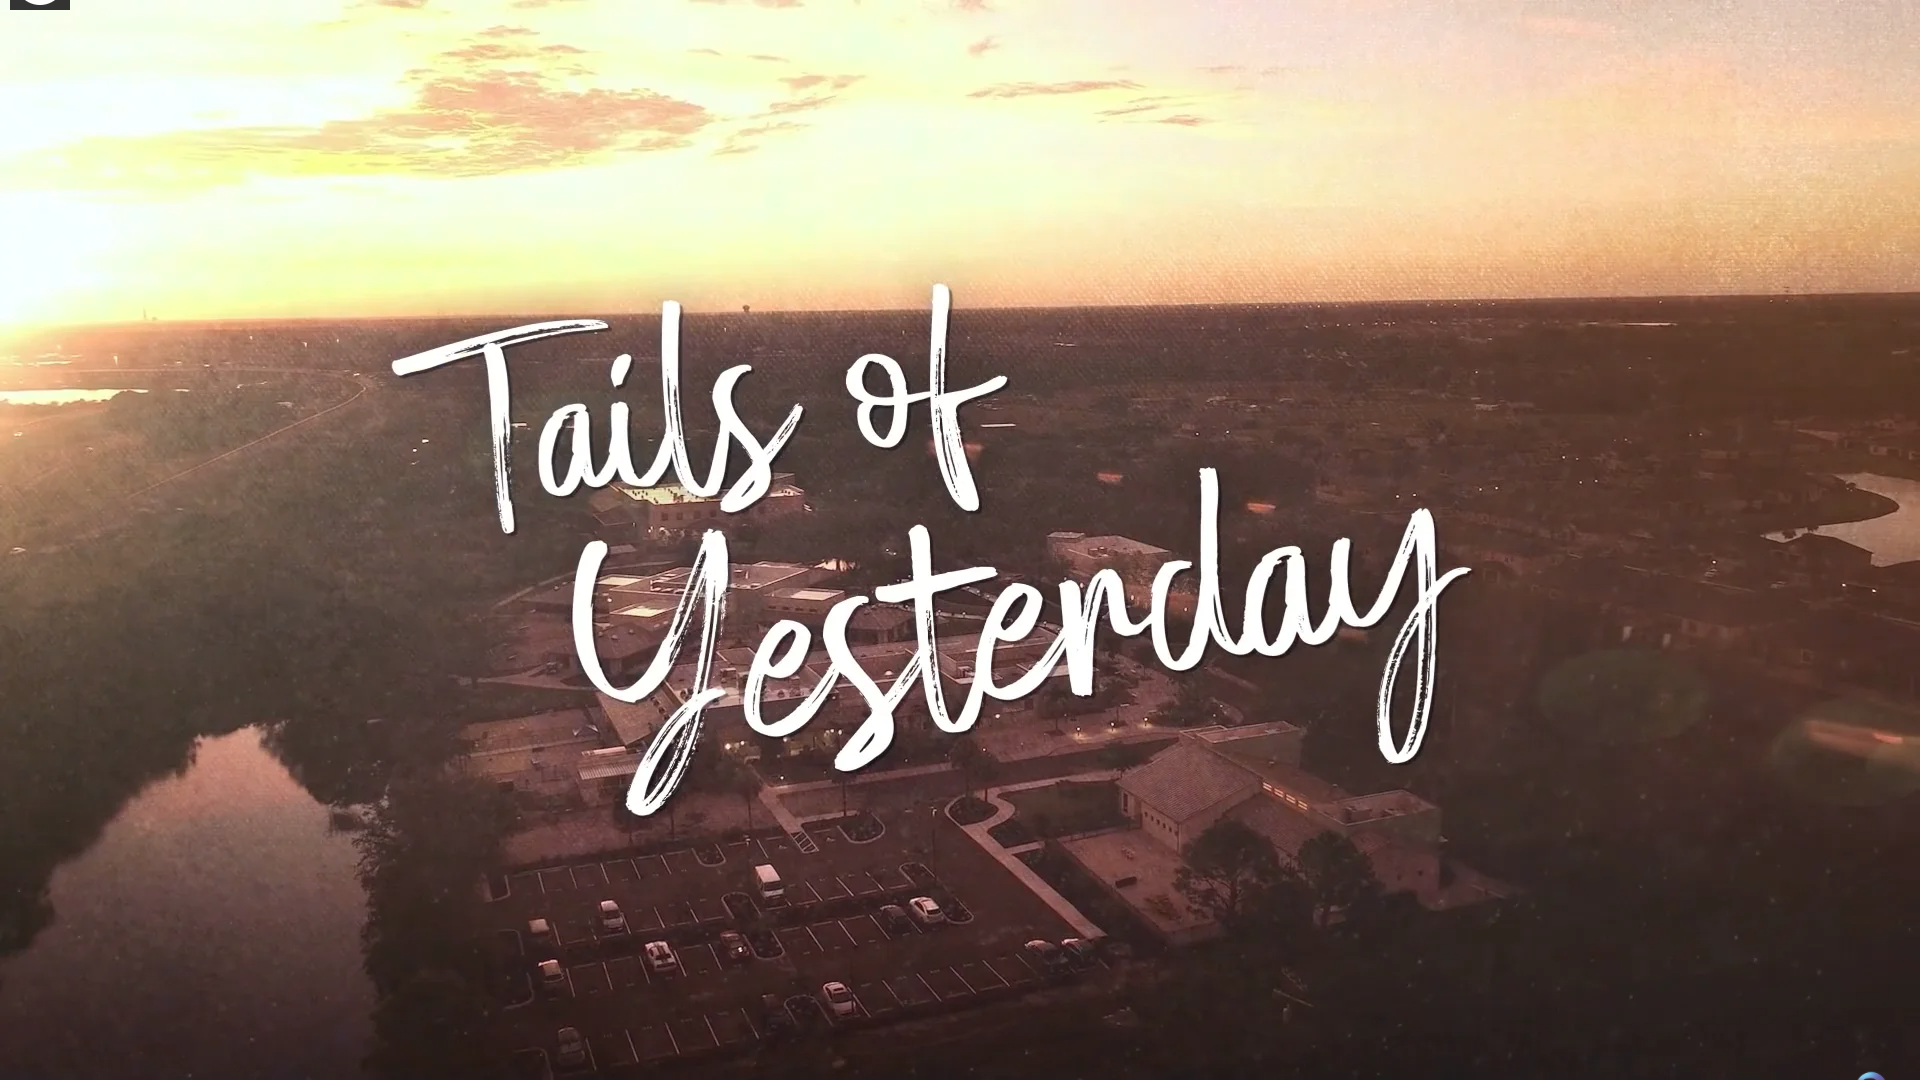 Text: Tails of Yesterday, pictured with an aerial view of the campus